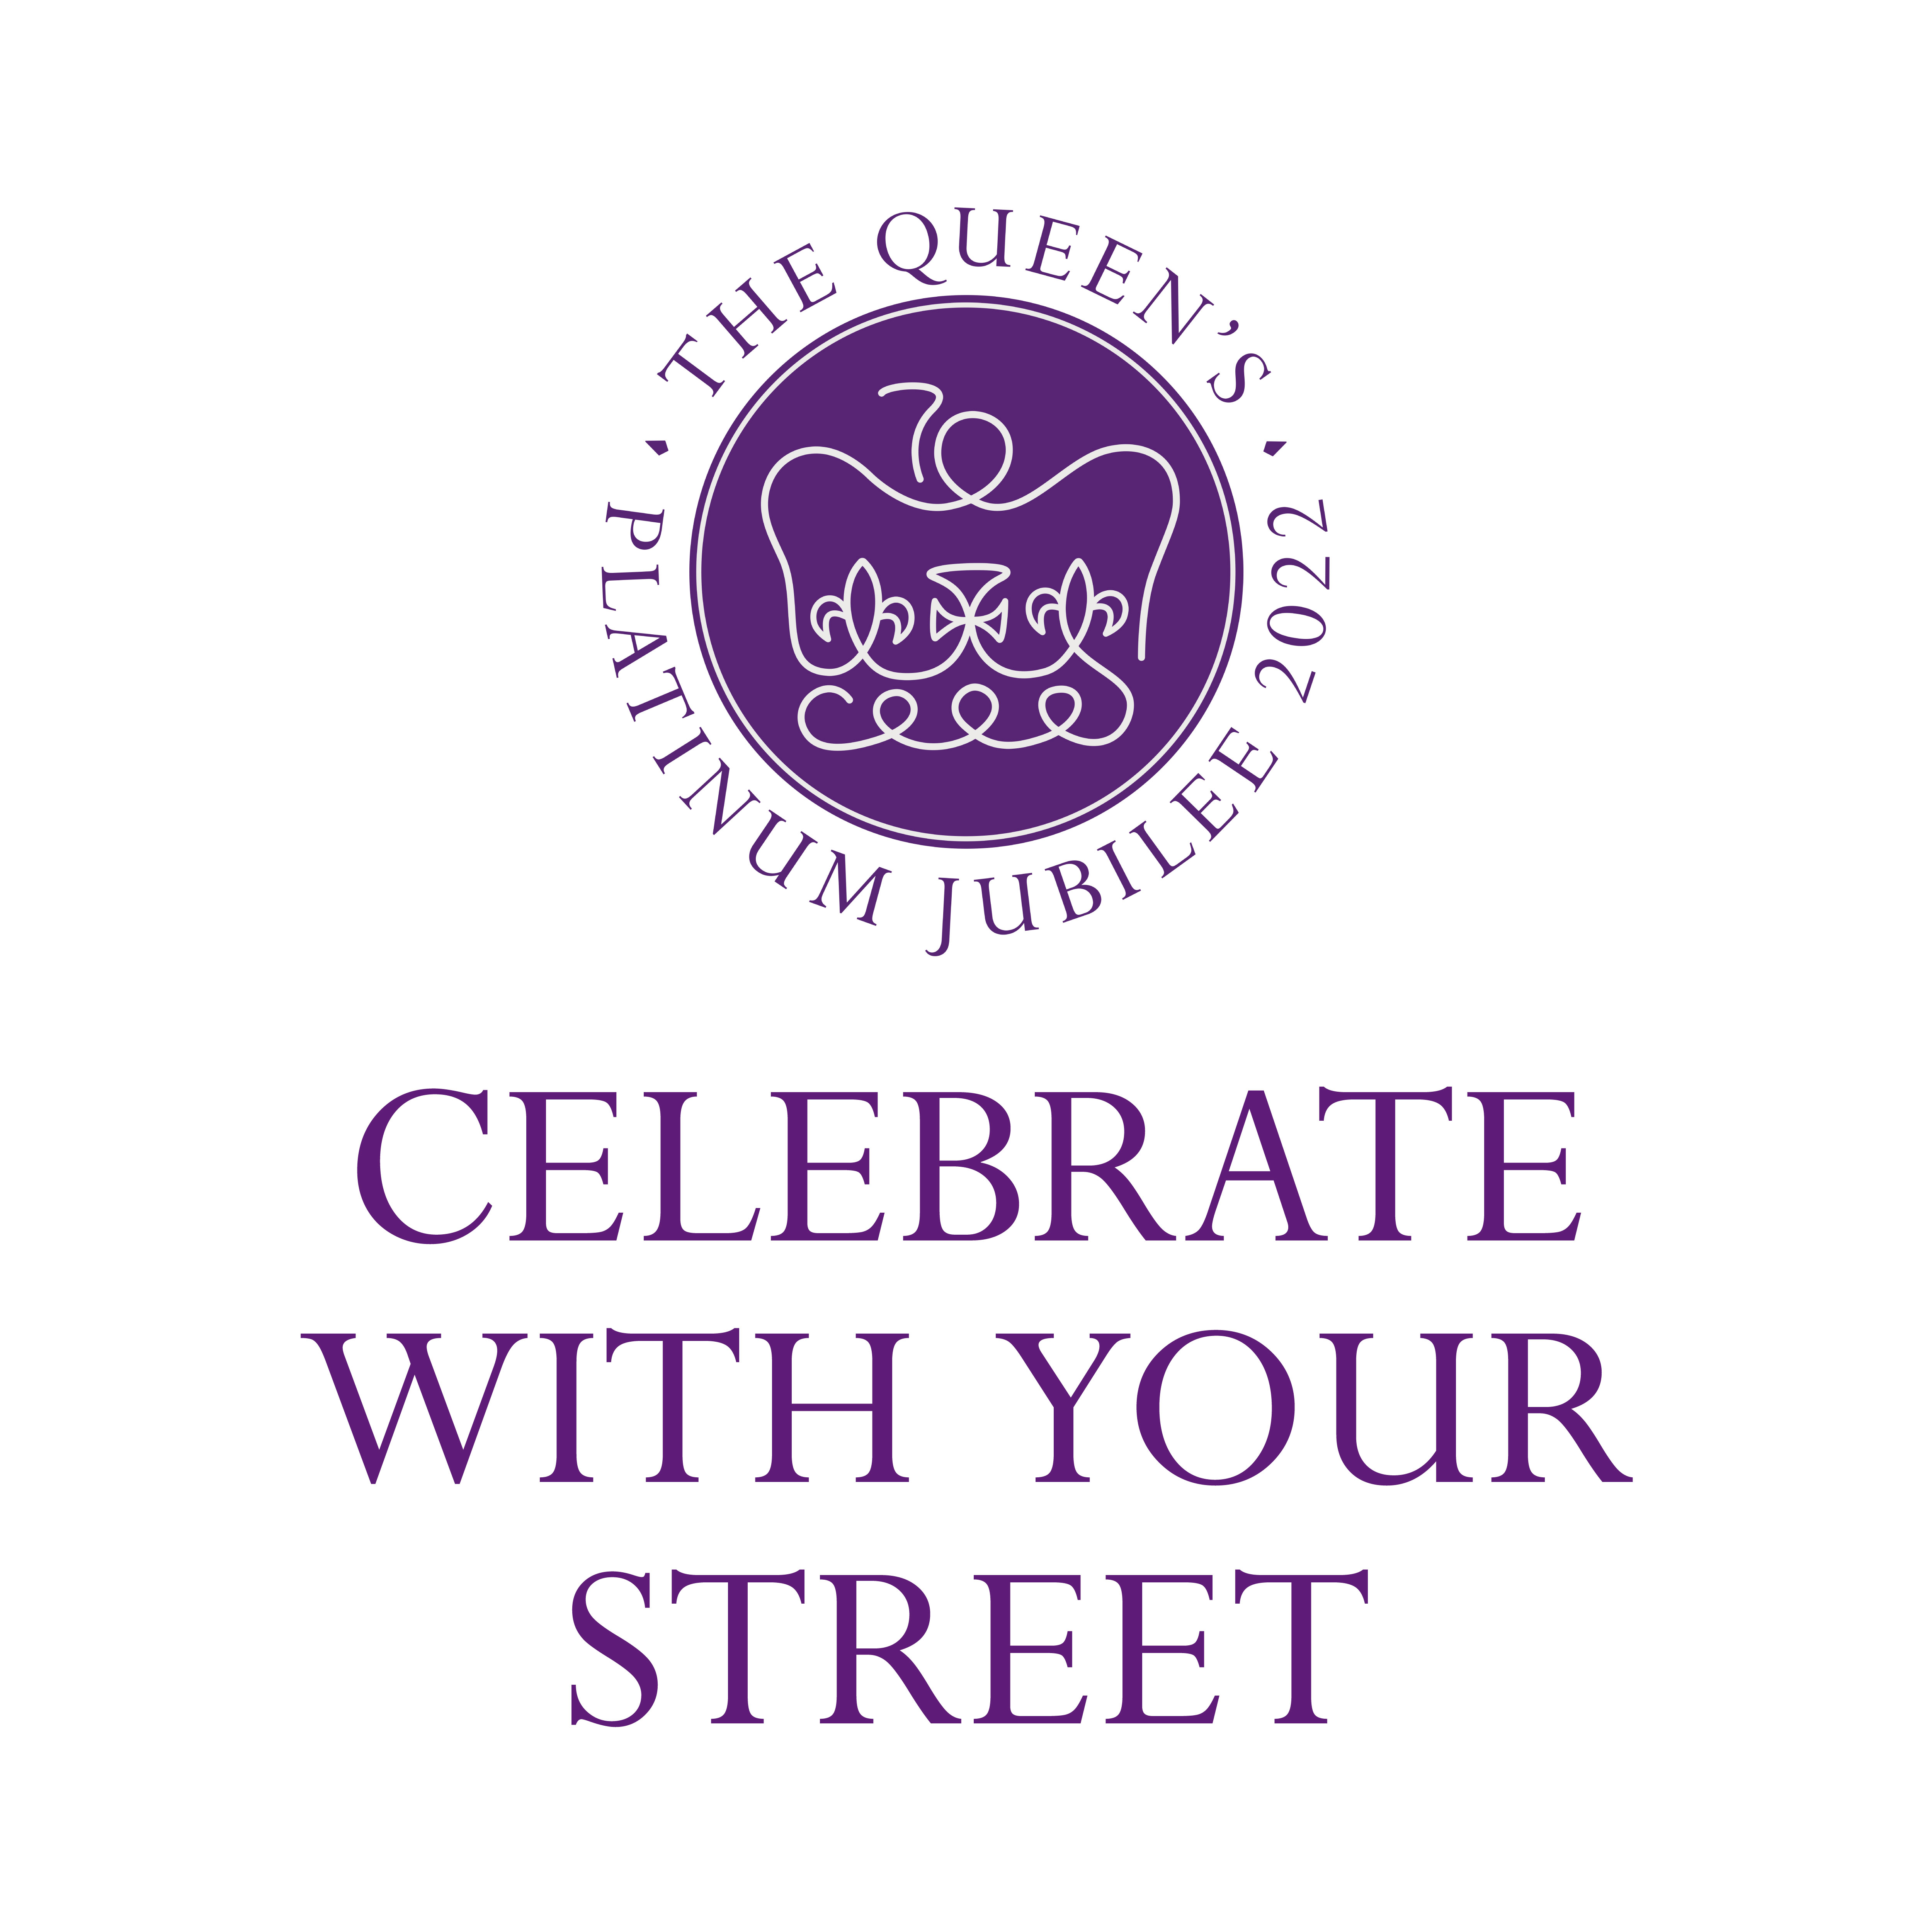 Text says celebrate with your street